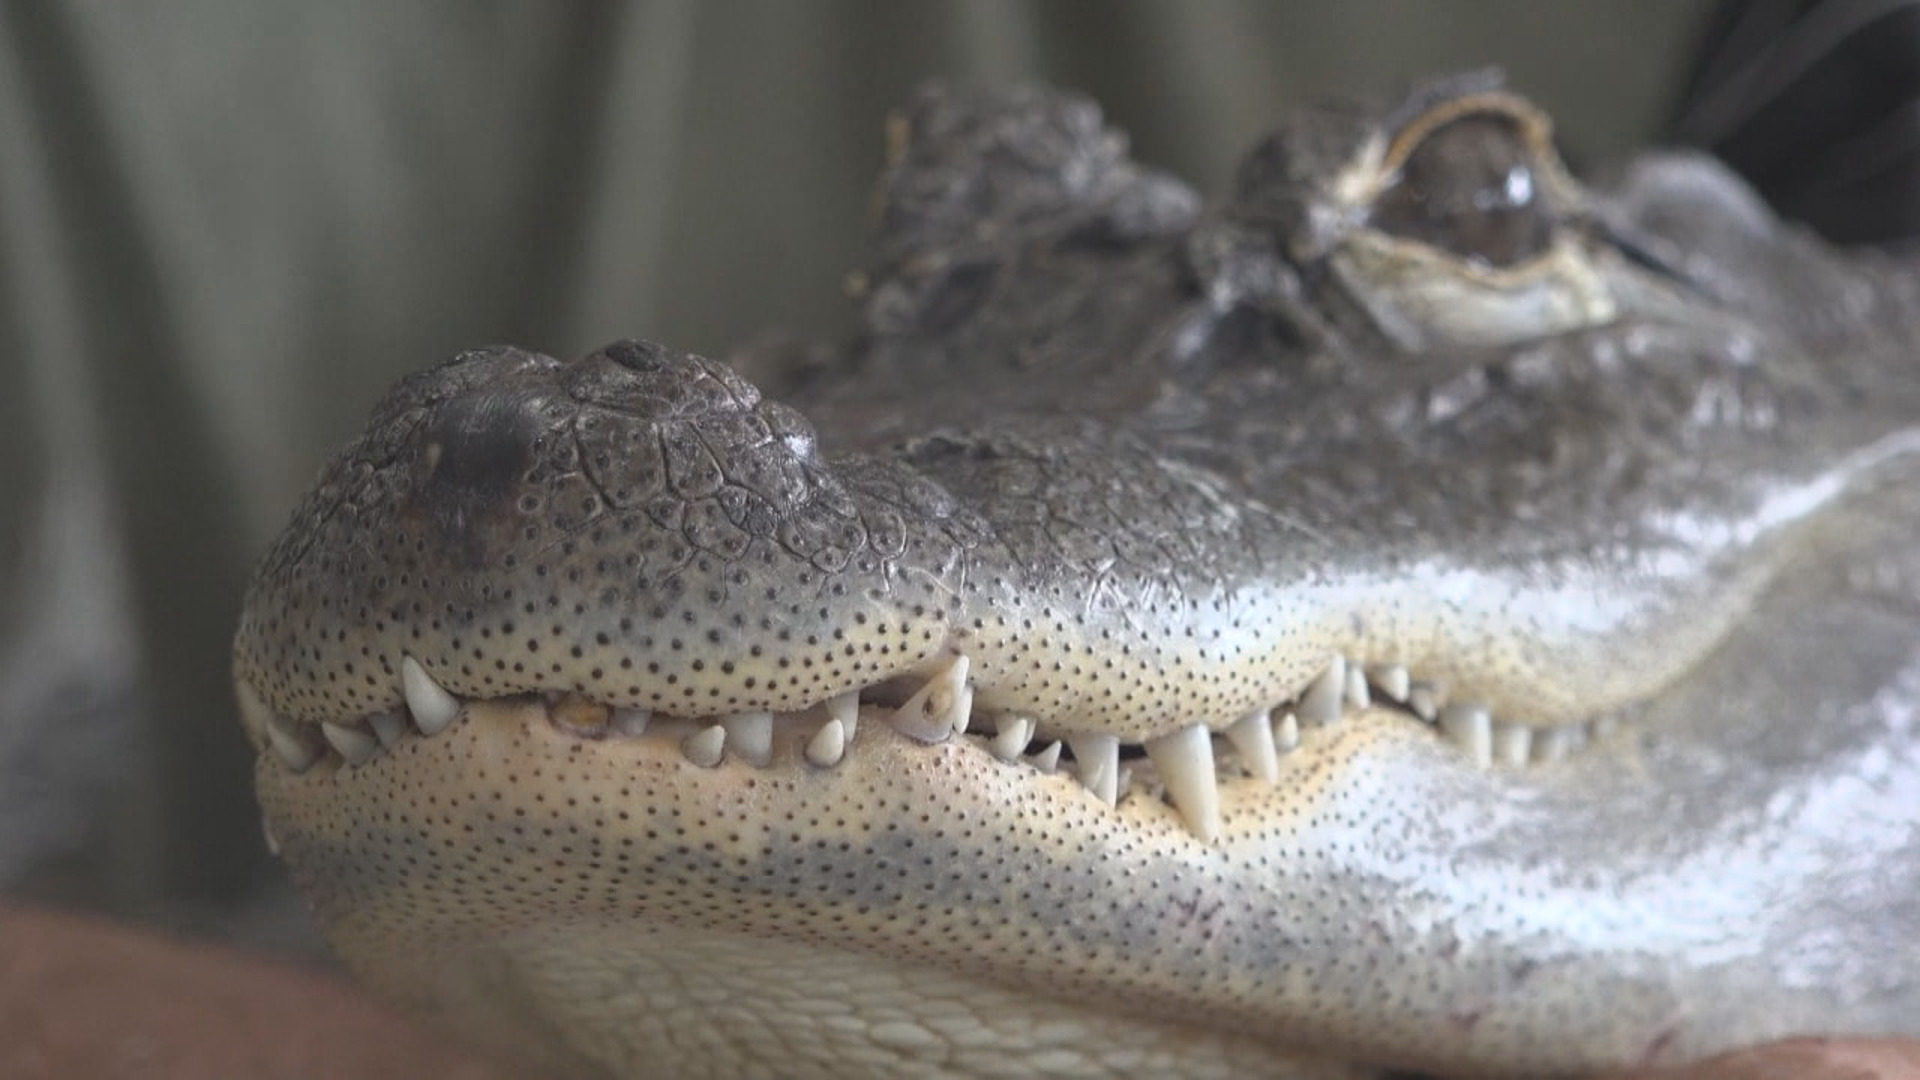 Owner Joie Henney gives an emotional interview when speaking on the disappearance of his beloved alligator companion.